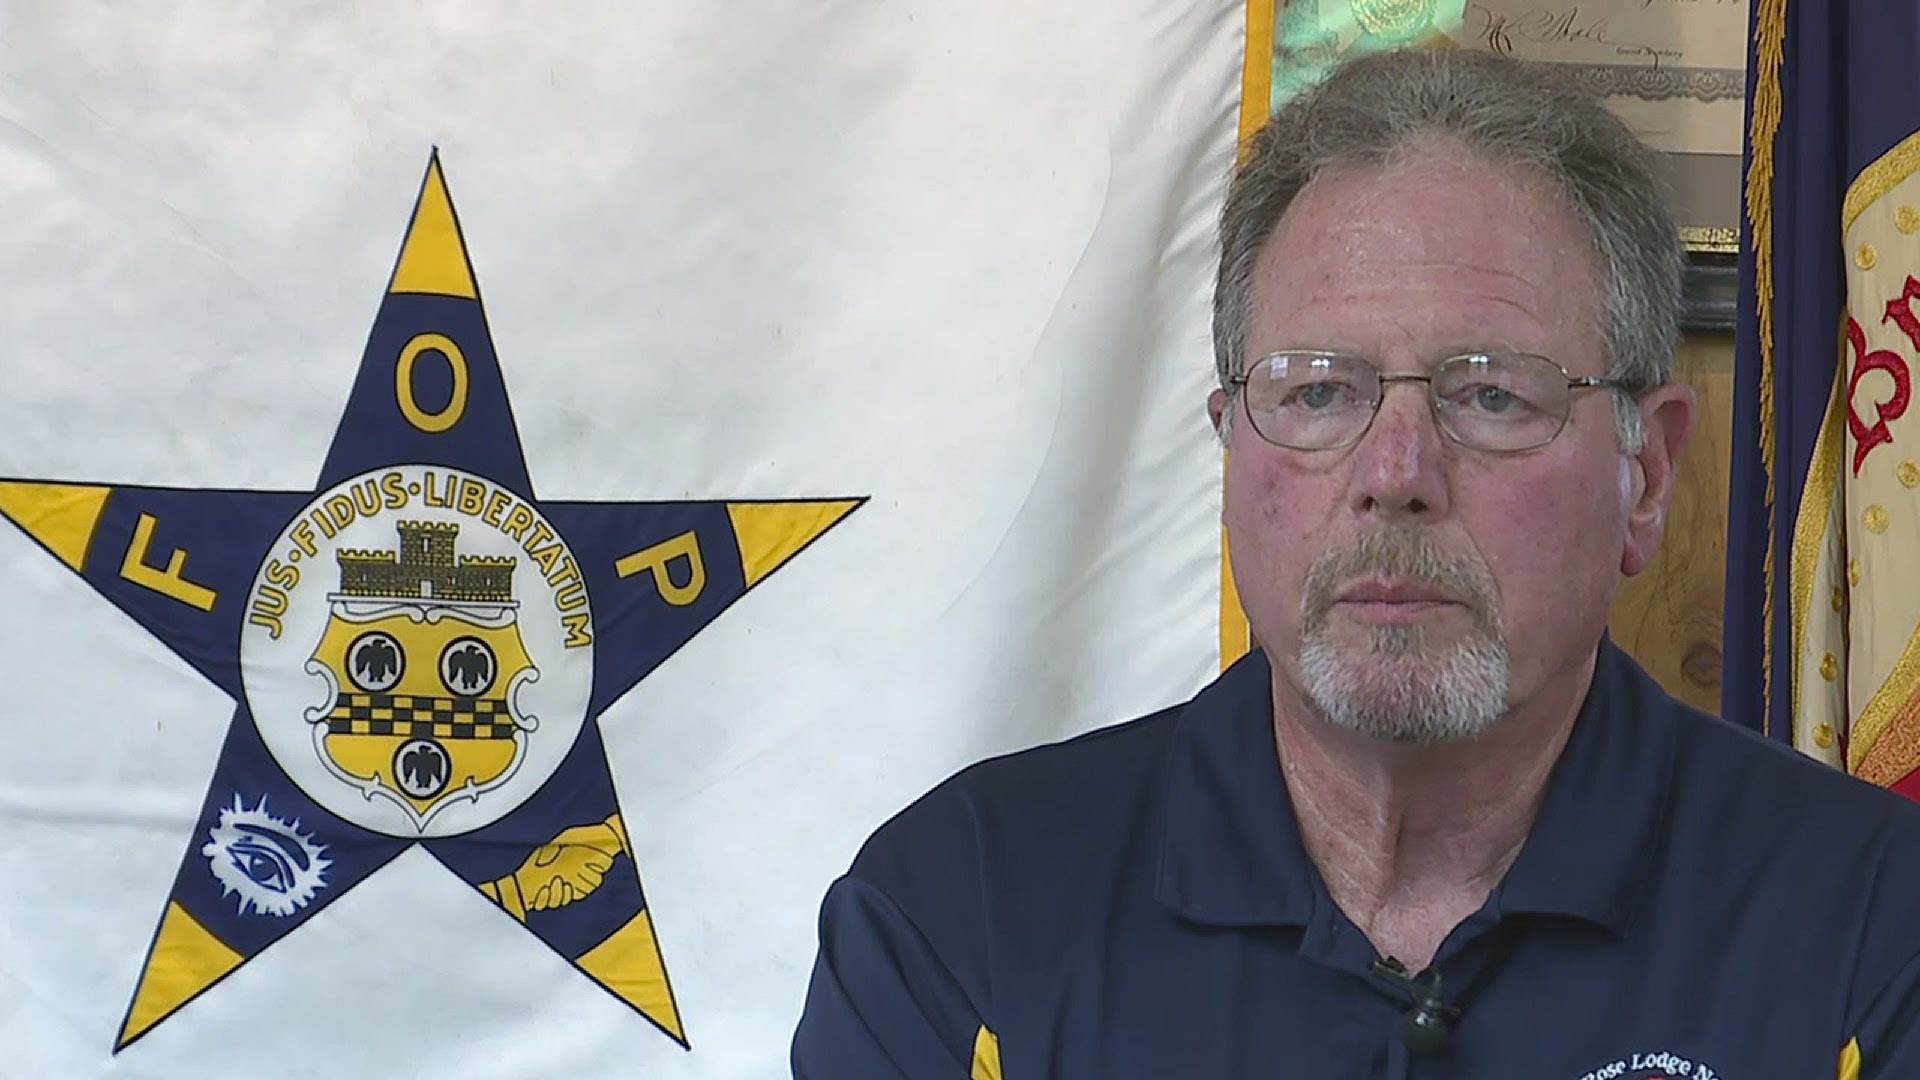 John Fiorill called the alleged forced retirement an offense to Berkihiser & law enforcement across the county. A petition is calling for the chief's reinstatement.